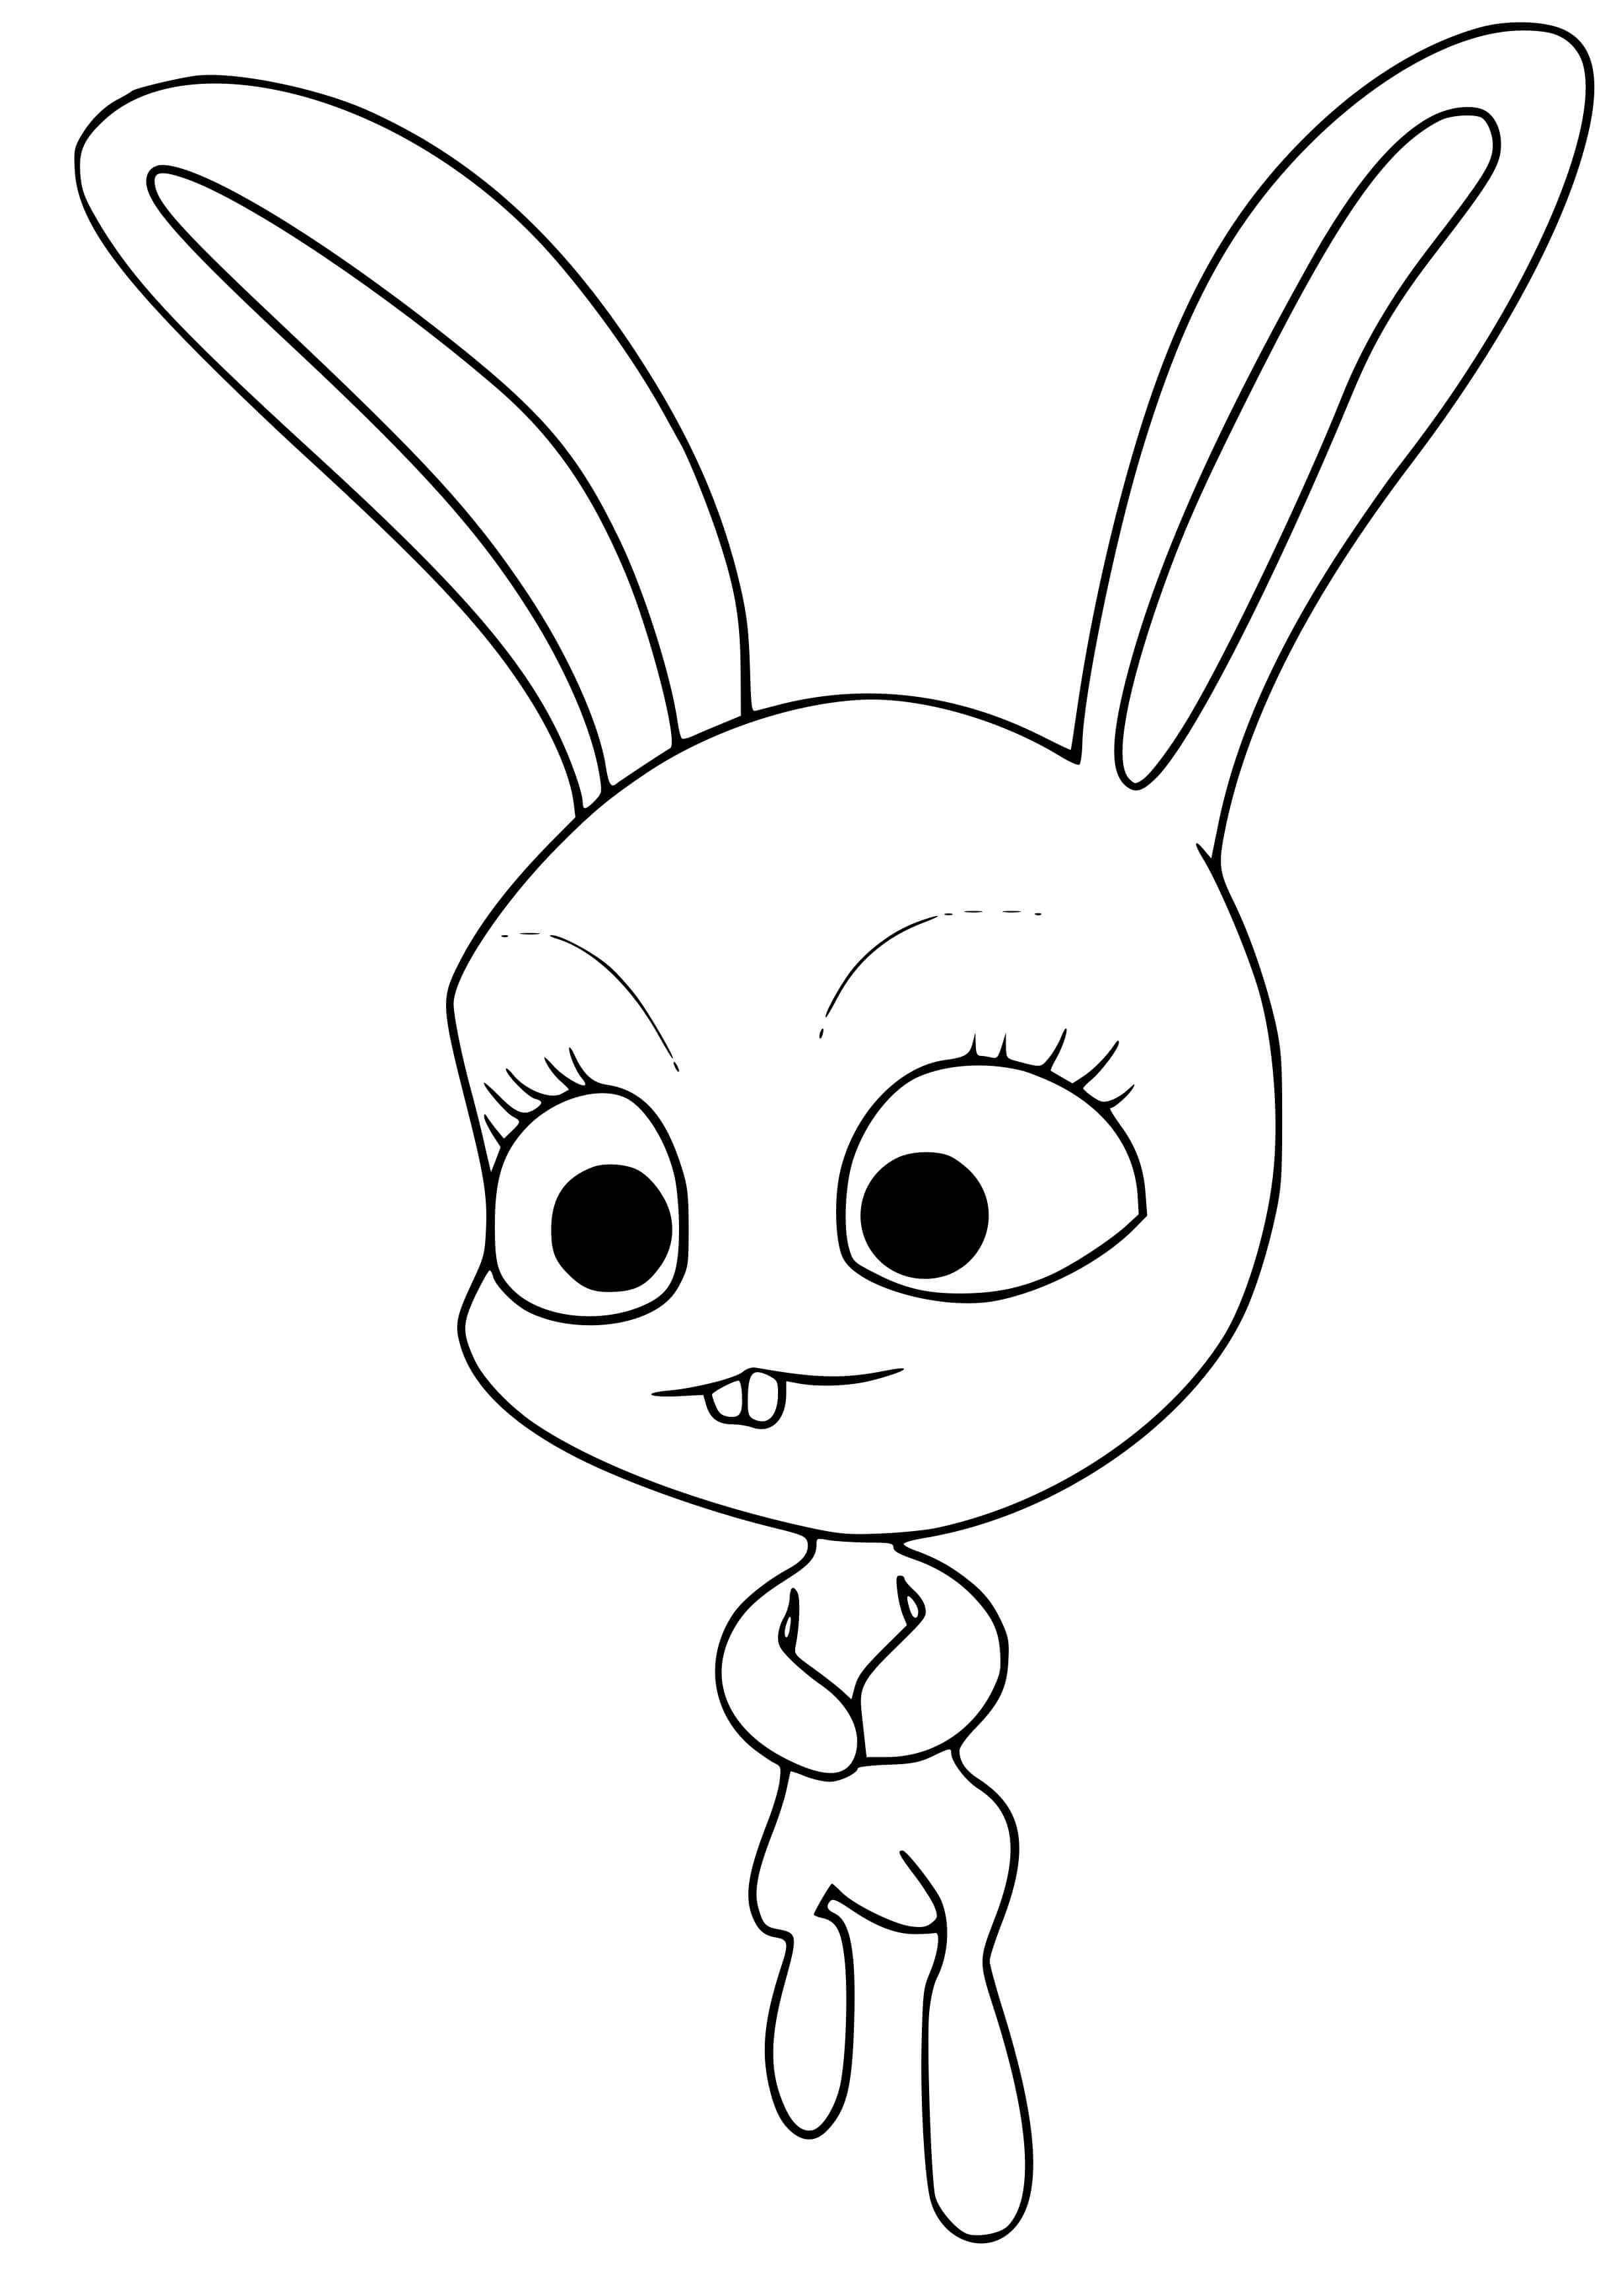 Kwami Fluff Coloring Page